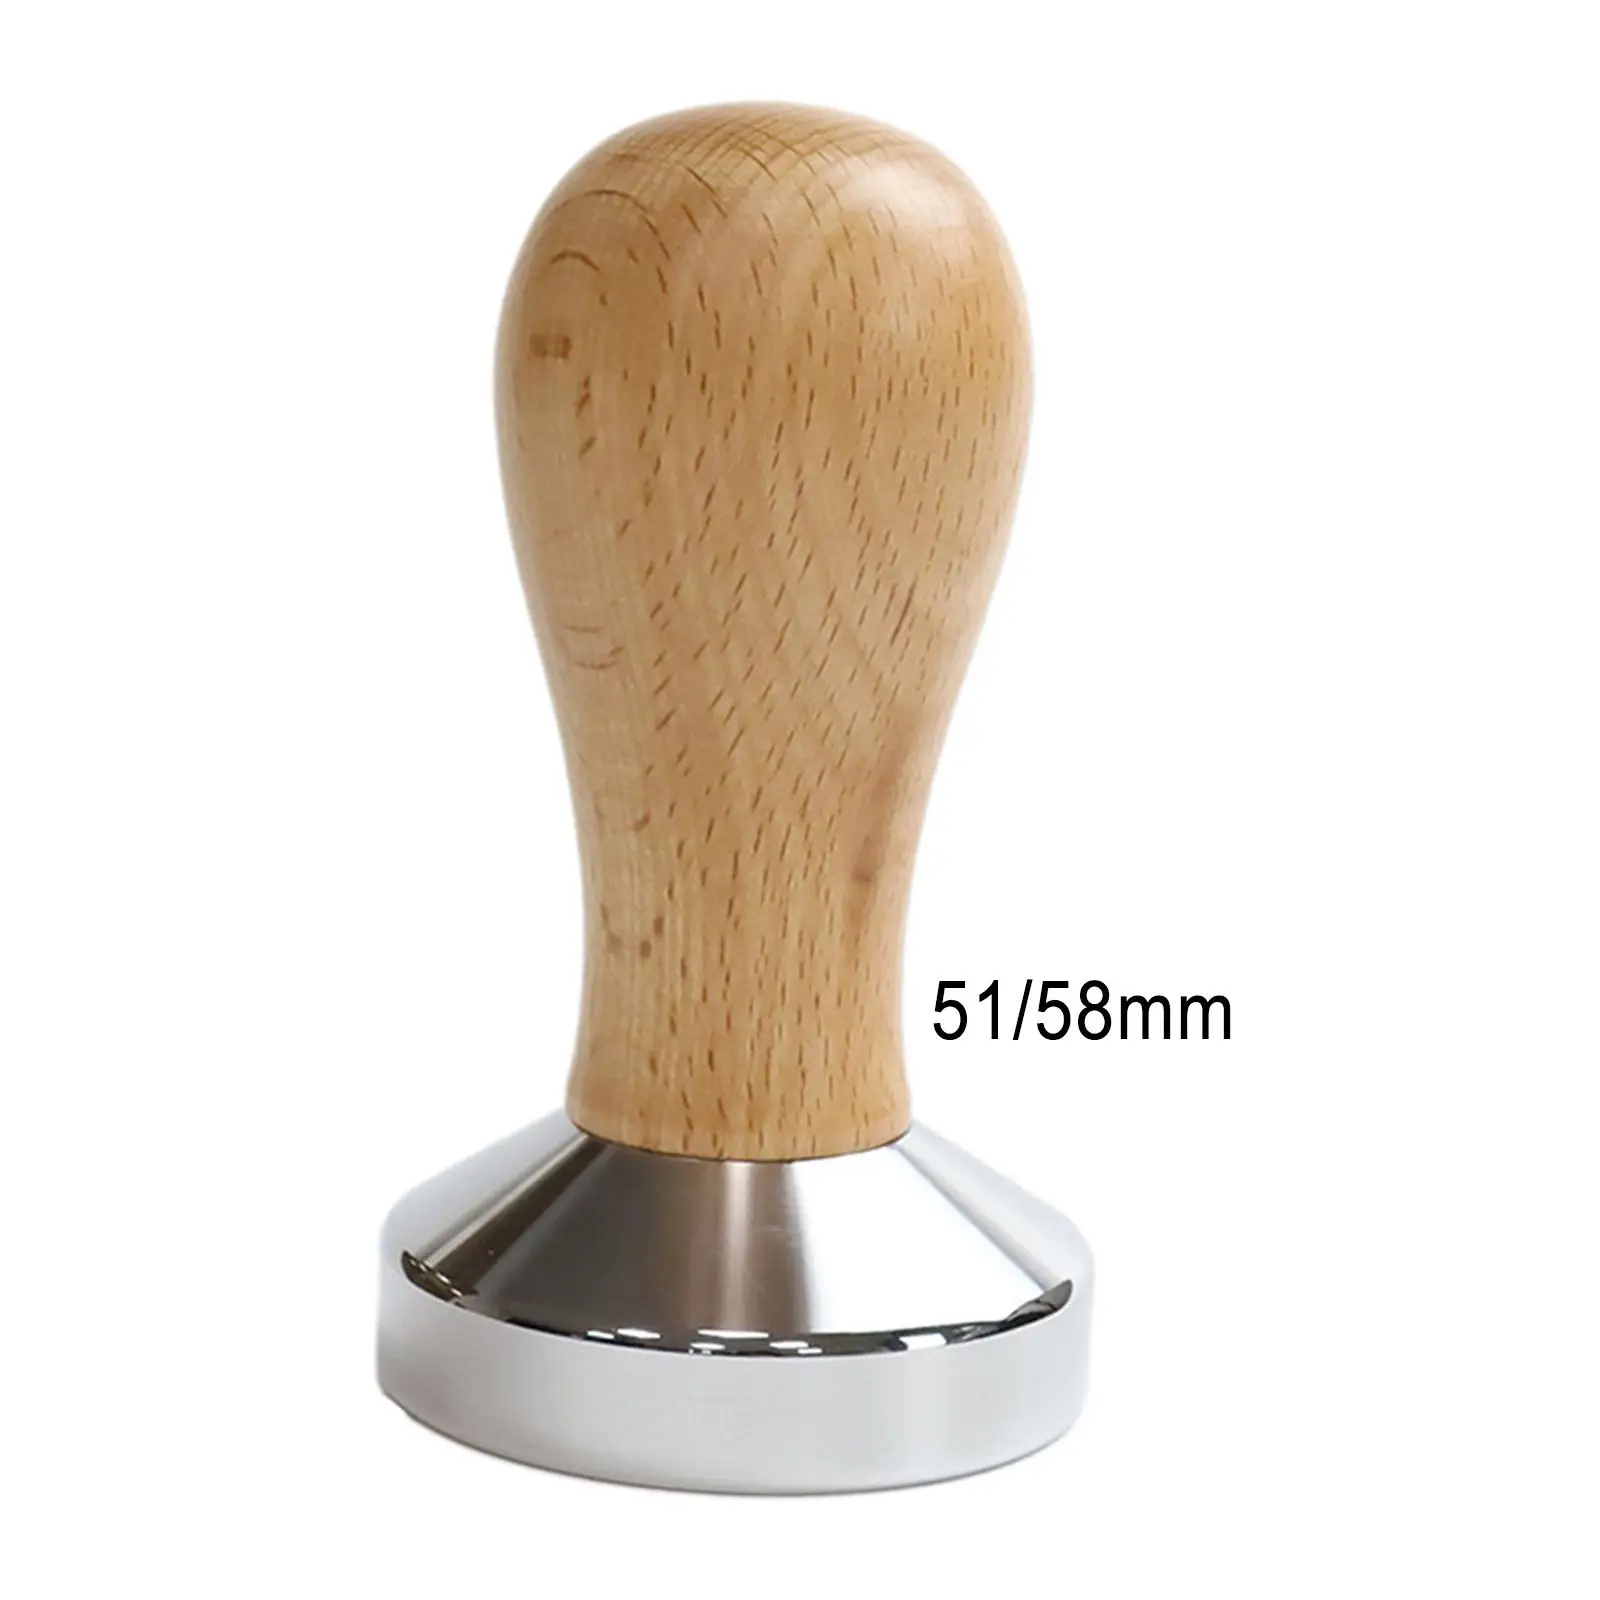 Professional Coffee Tamper Wood Handle Pressing Barista Tool Tools Powder Hammer Leveler Espresso Distributor for Home Office